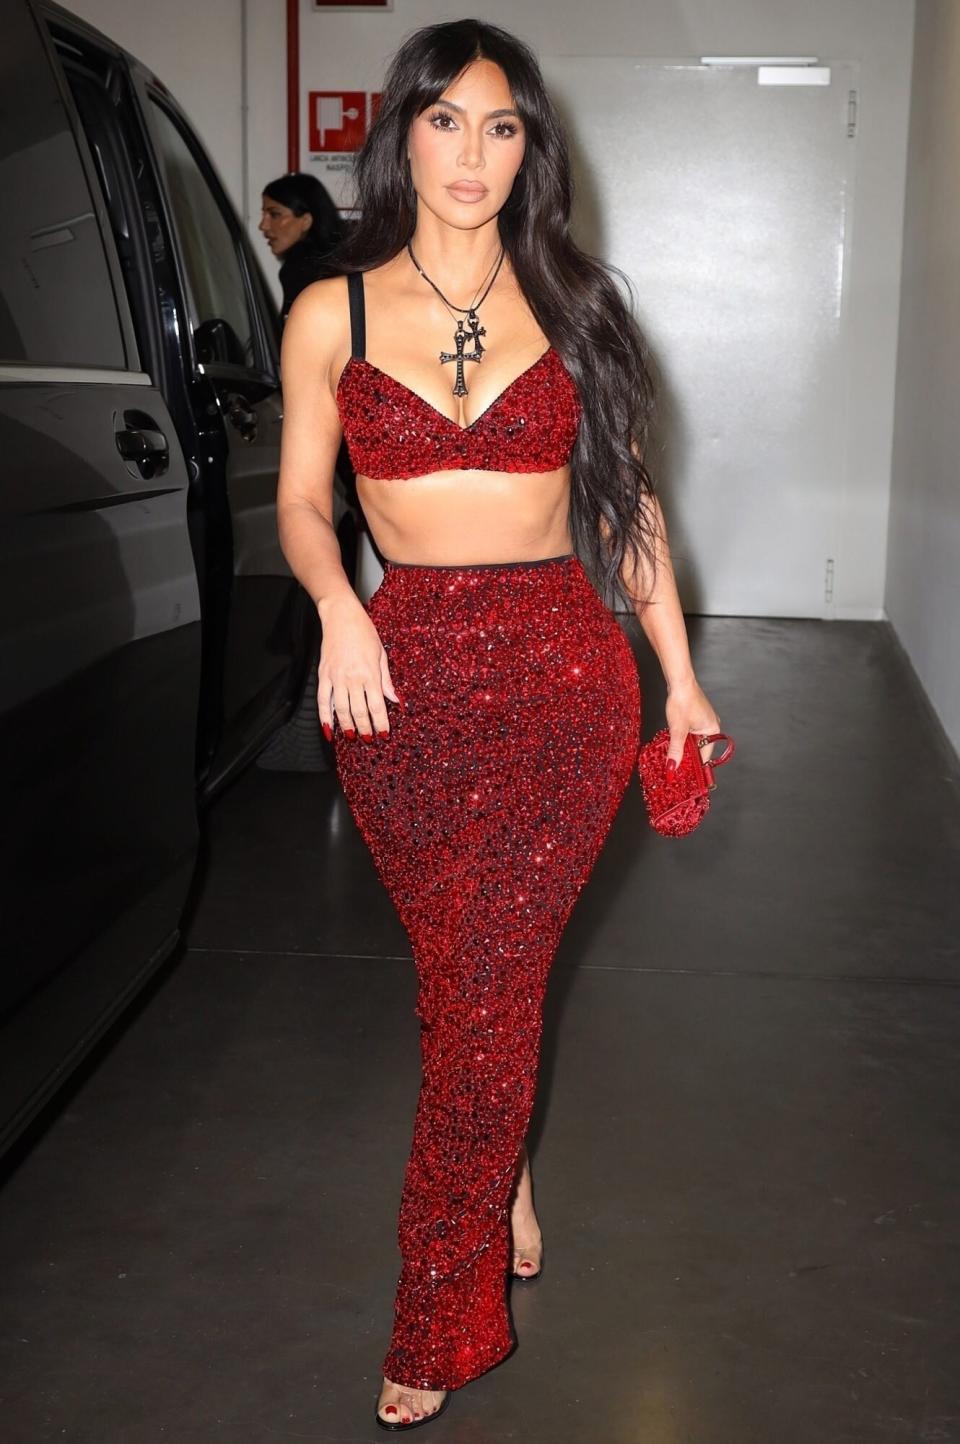 Milan, ITALY - *EXCLUSIVE* - Kim Kardashian turns heads as she graces the Dolce & Gabbana fashion show in Milan, looking fiery in a dazzling jeweled outfit that left everyone in awe. The reality TV queen proves once again that she's a fashion icon to reckon with! Pictured: Kim Kardashian BACKGRID USA 25 FEBRUARY 2023 BYLINE MUST READ: WWW.LUCASGRO.EU / BACKGRID USA: +1 310 798 9111 / usasales@backgrid.com UK: +44 208 344 2007 / uksales@backgrid.com *UK Clients - Pictures Containing Children Please Pixelate Face Prior To Publication*